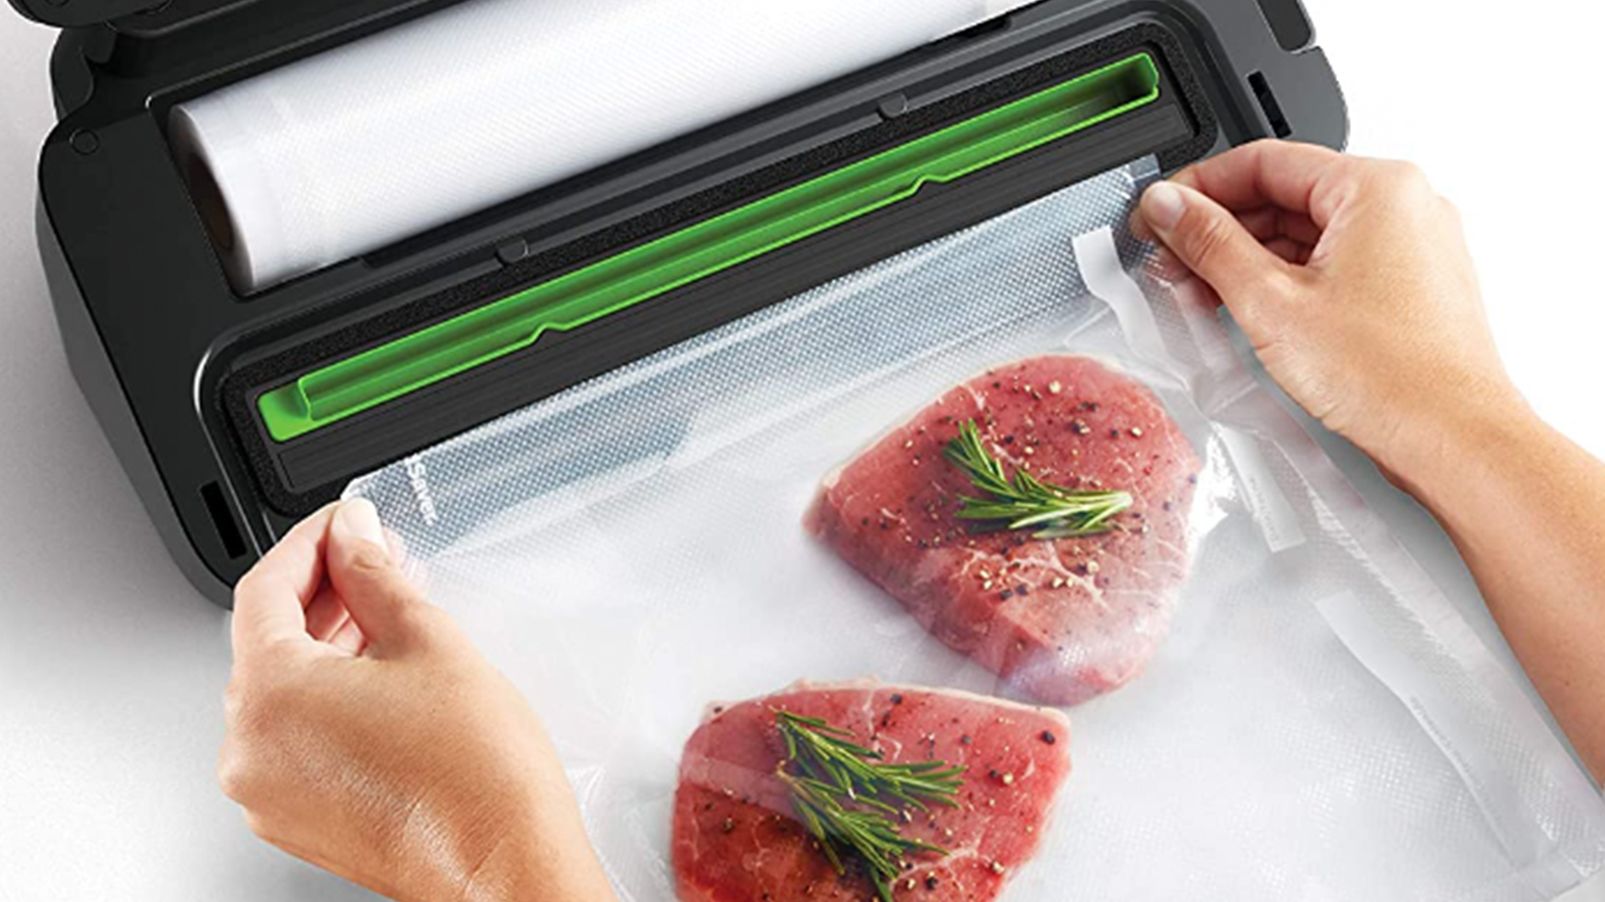 6 reasons to get a vacuum sealer (that aren't just food storage) - CNET